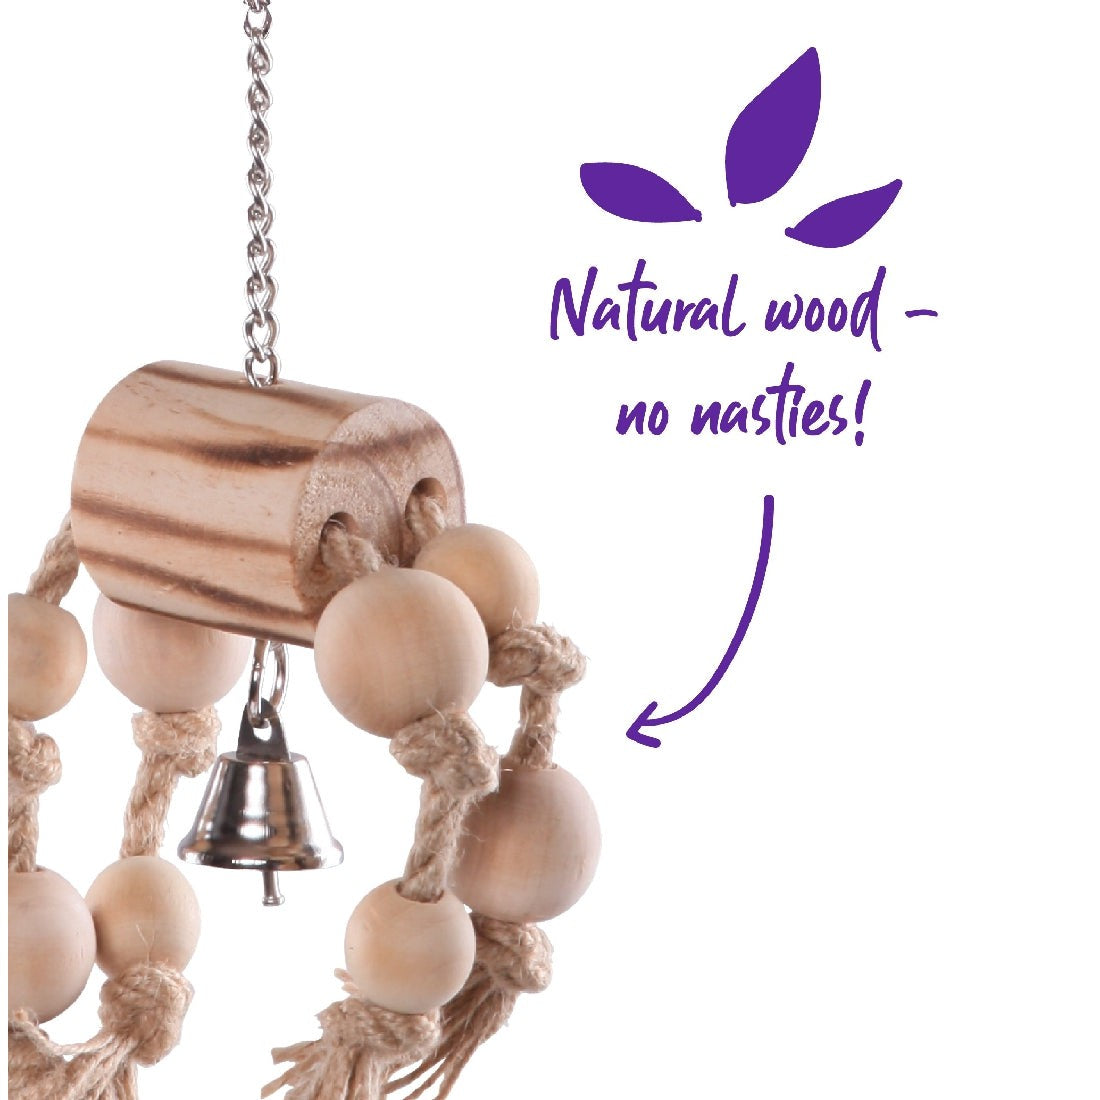 Hanging wooden bird toy with beads, rope, and a small bell.